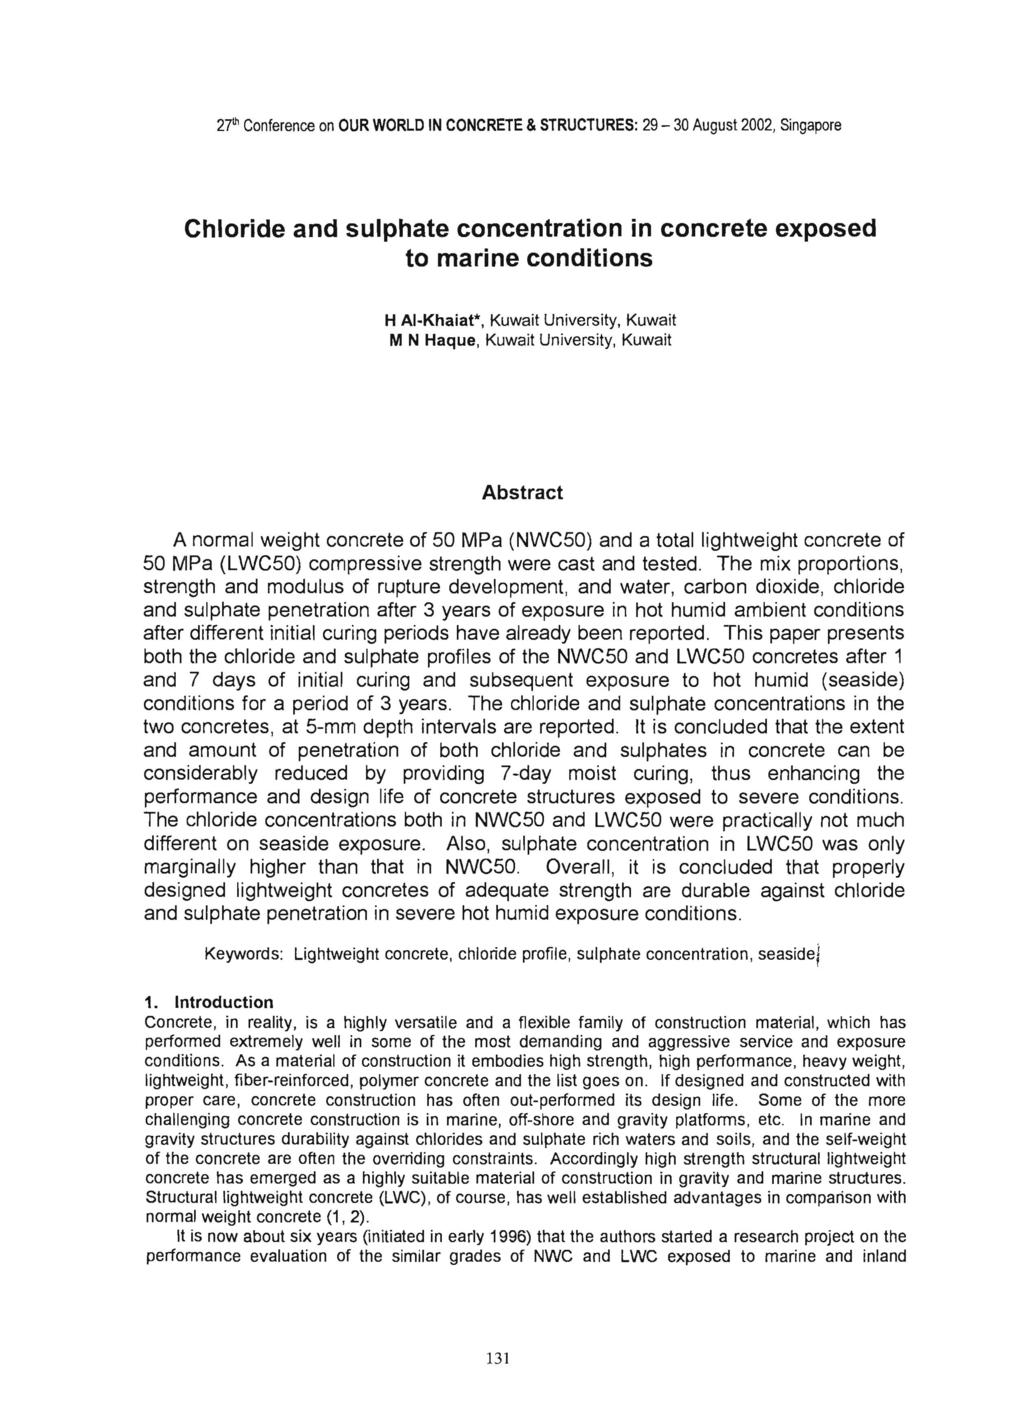 27 th Conference on OUR WORLD IN CONCRETE & STRUCTURES: 29-30 August 2002, Singapore Chloride and sulphate concentration in concrete exposed to marine conditions H AI-Khaiat*, Kuwait University,